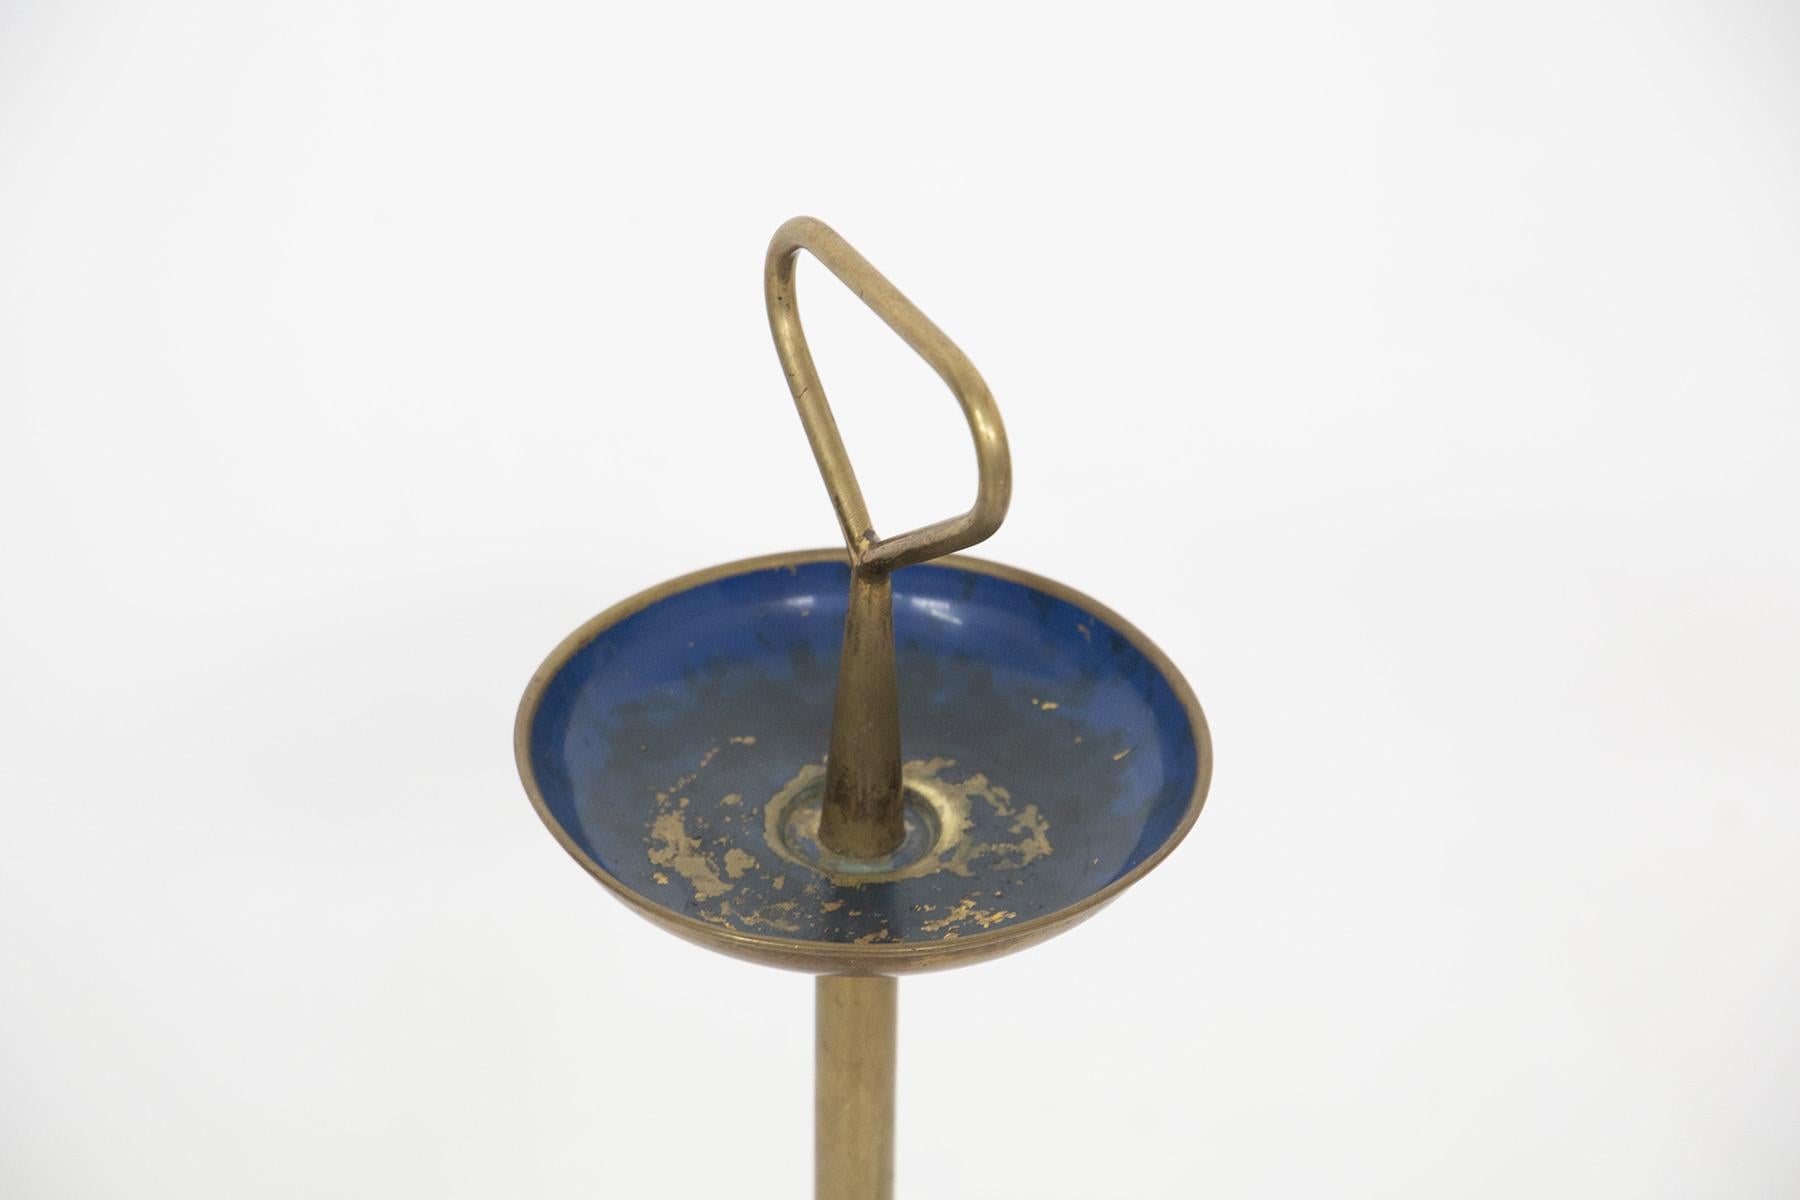 Elegant Italian ashtray attributed to Osvaldo Borsani from the 1950s, of fine Italian manufacture.
The ashtray is made of brass in the frame, while its cigarette holder cup is made of blue lacquered brass. It features a handle that allows its